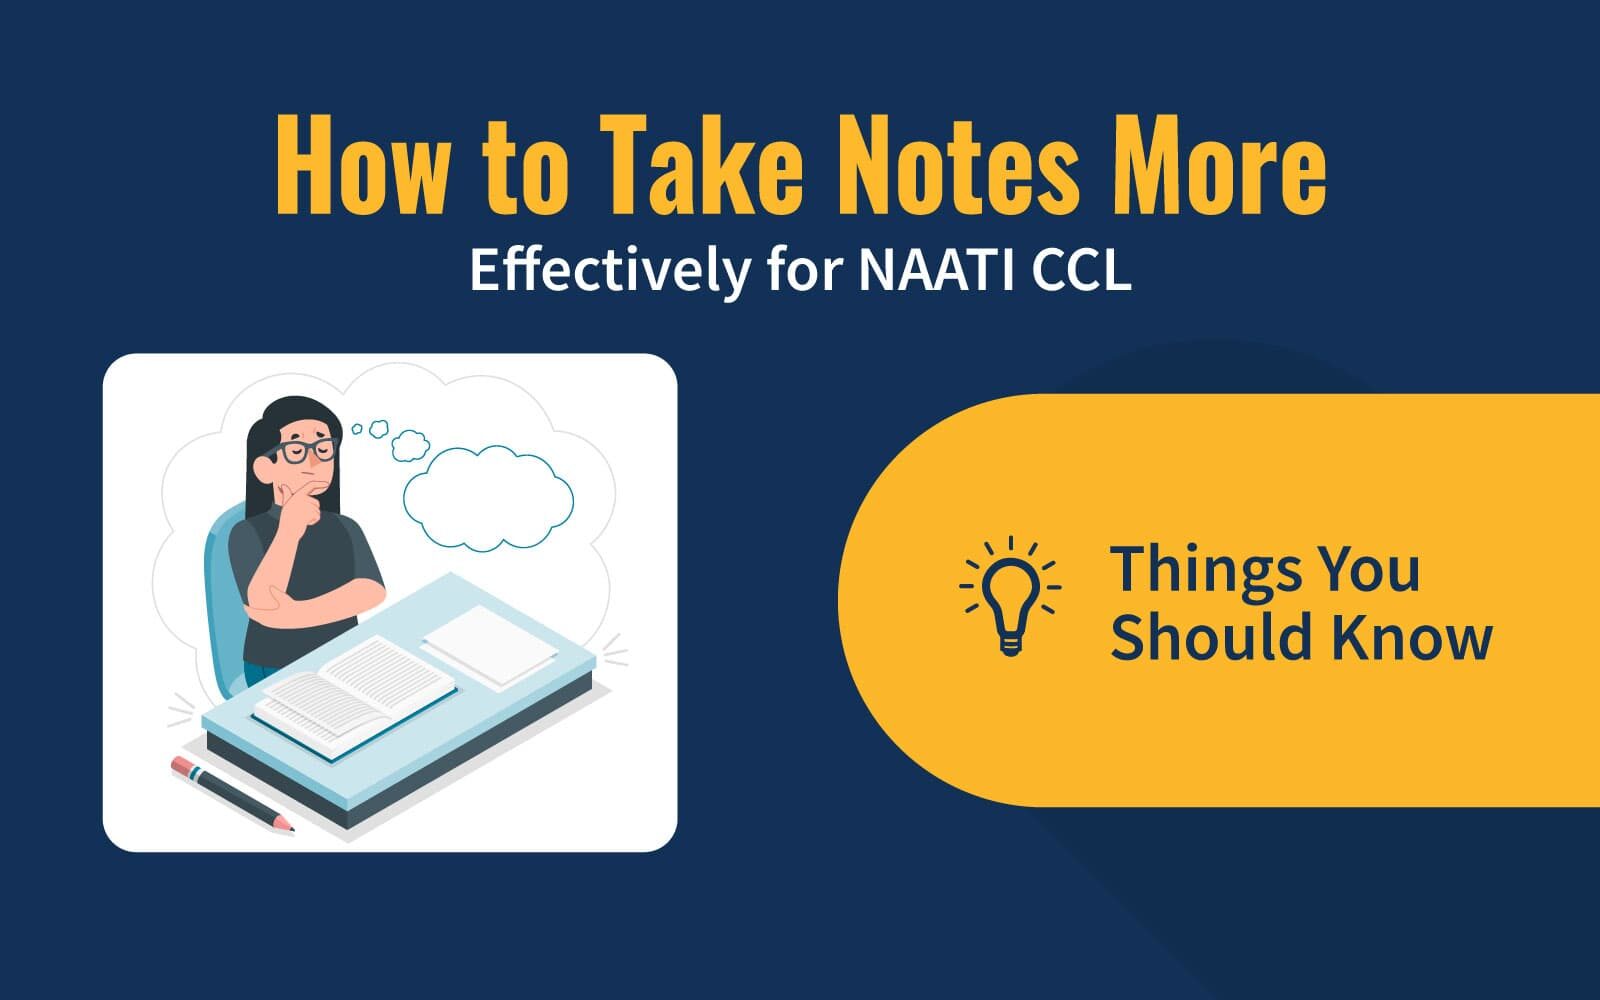 How to Take Notes More Effectively for NAATI CCL